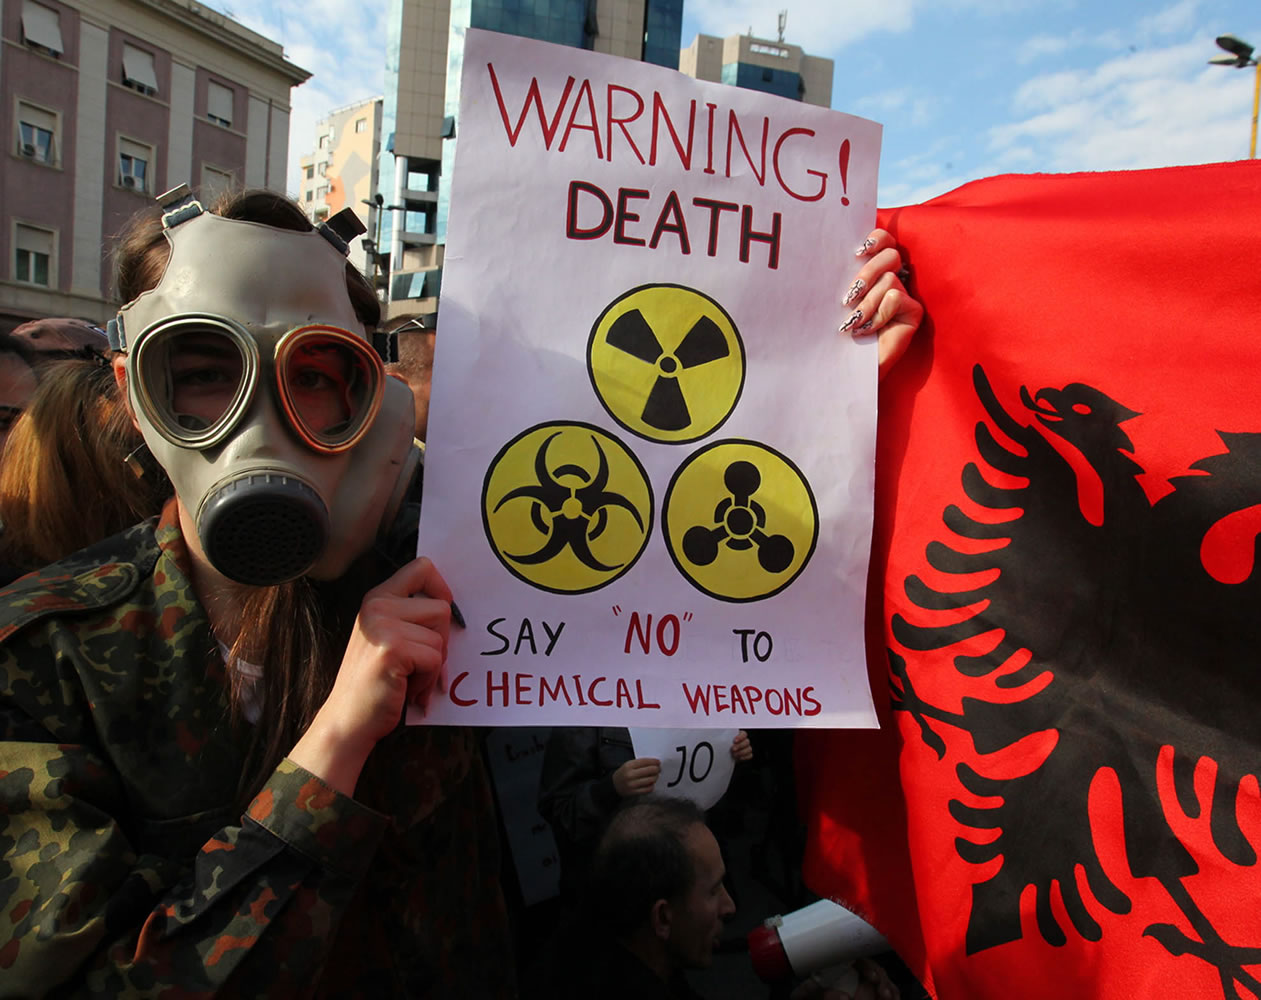 An Albanian student wears a gas mask and holds a sign during a protest against chemical weapons during a protest against the dismantling of Syrian chemical weapons in Albania in front of the Prime Minister's office in Tirana on Nov.